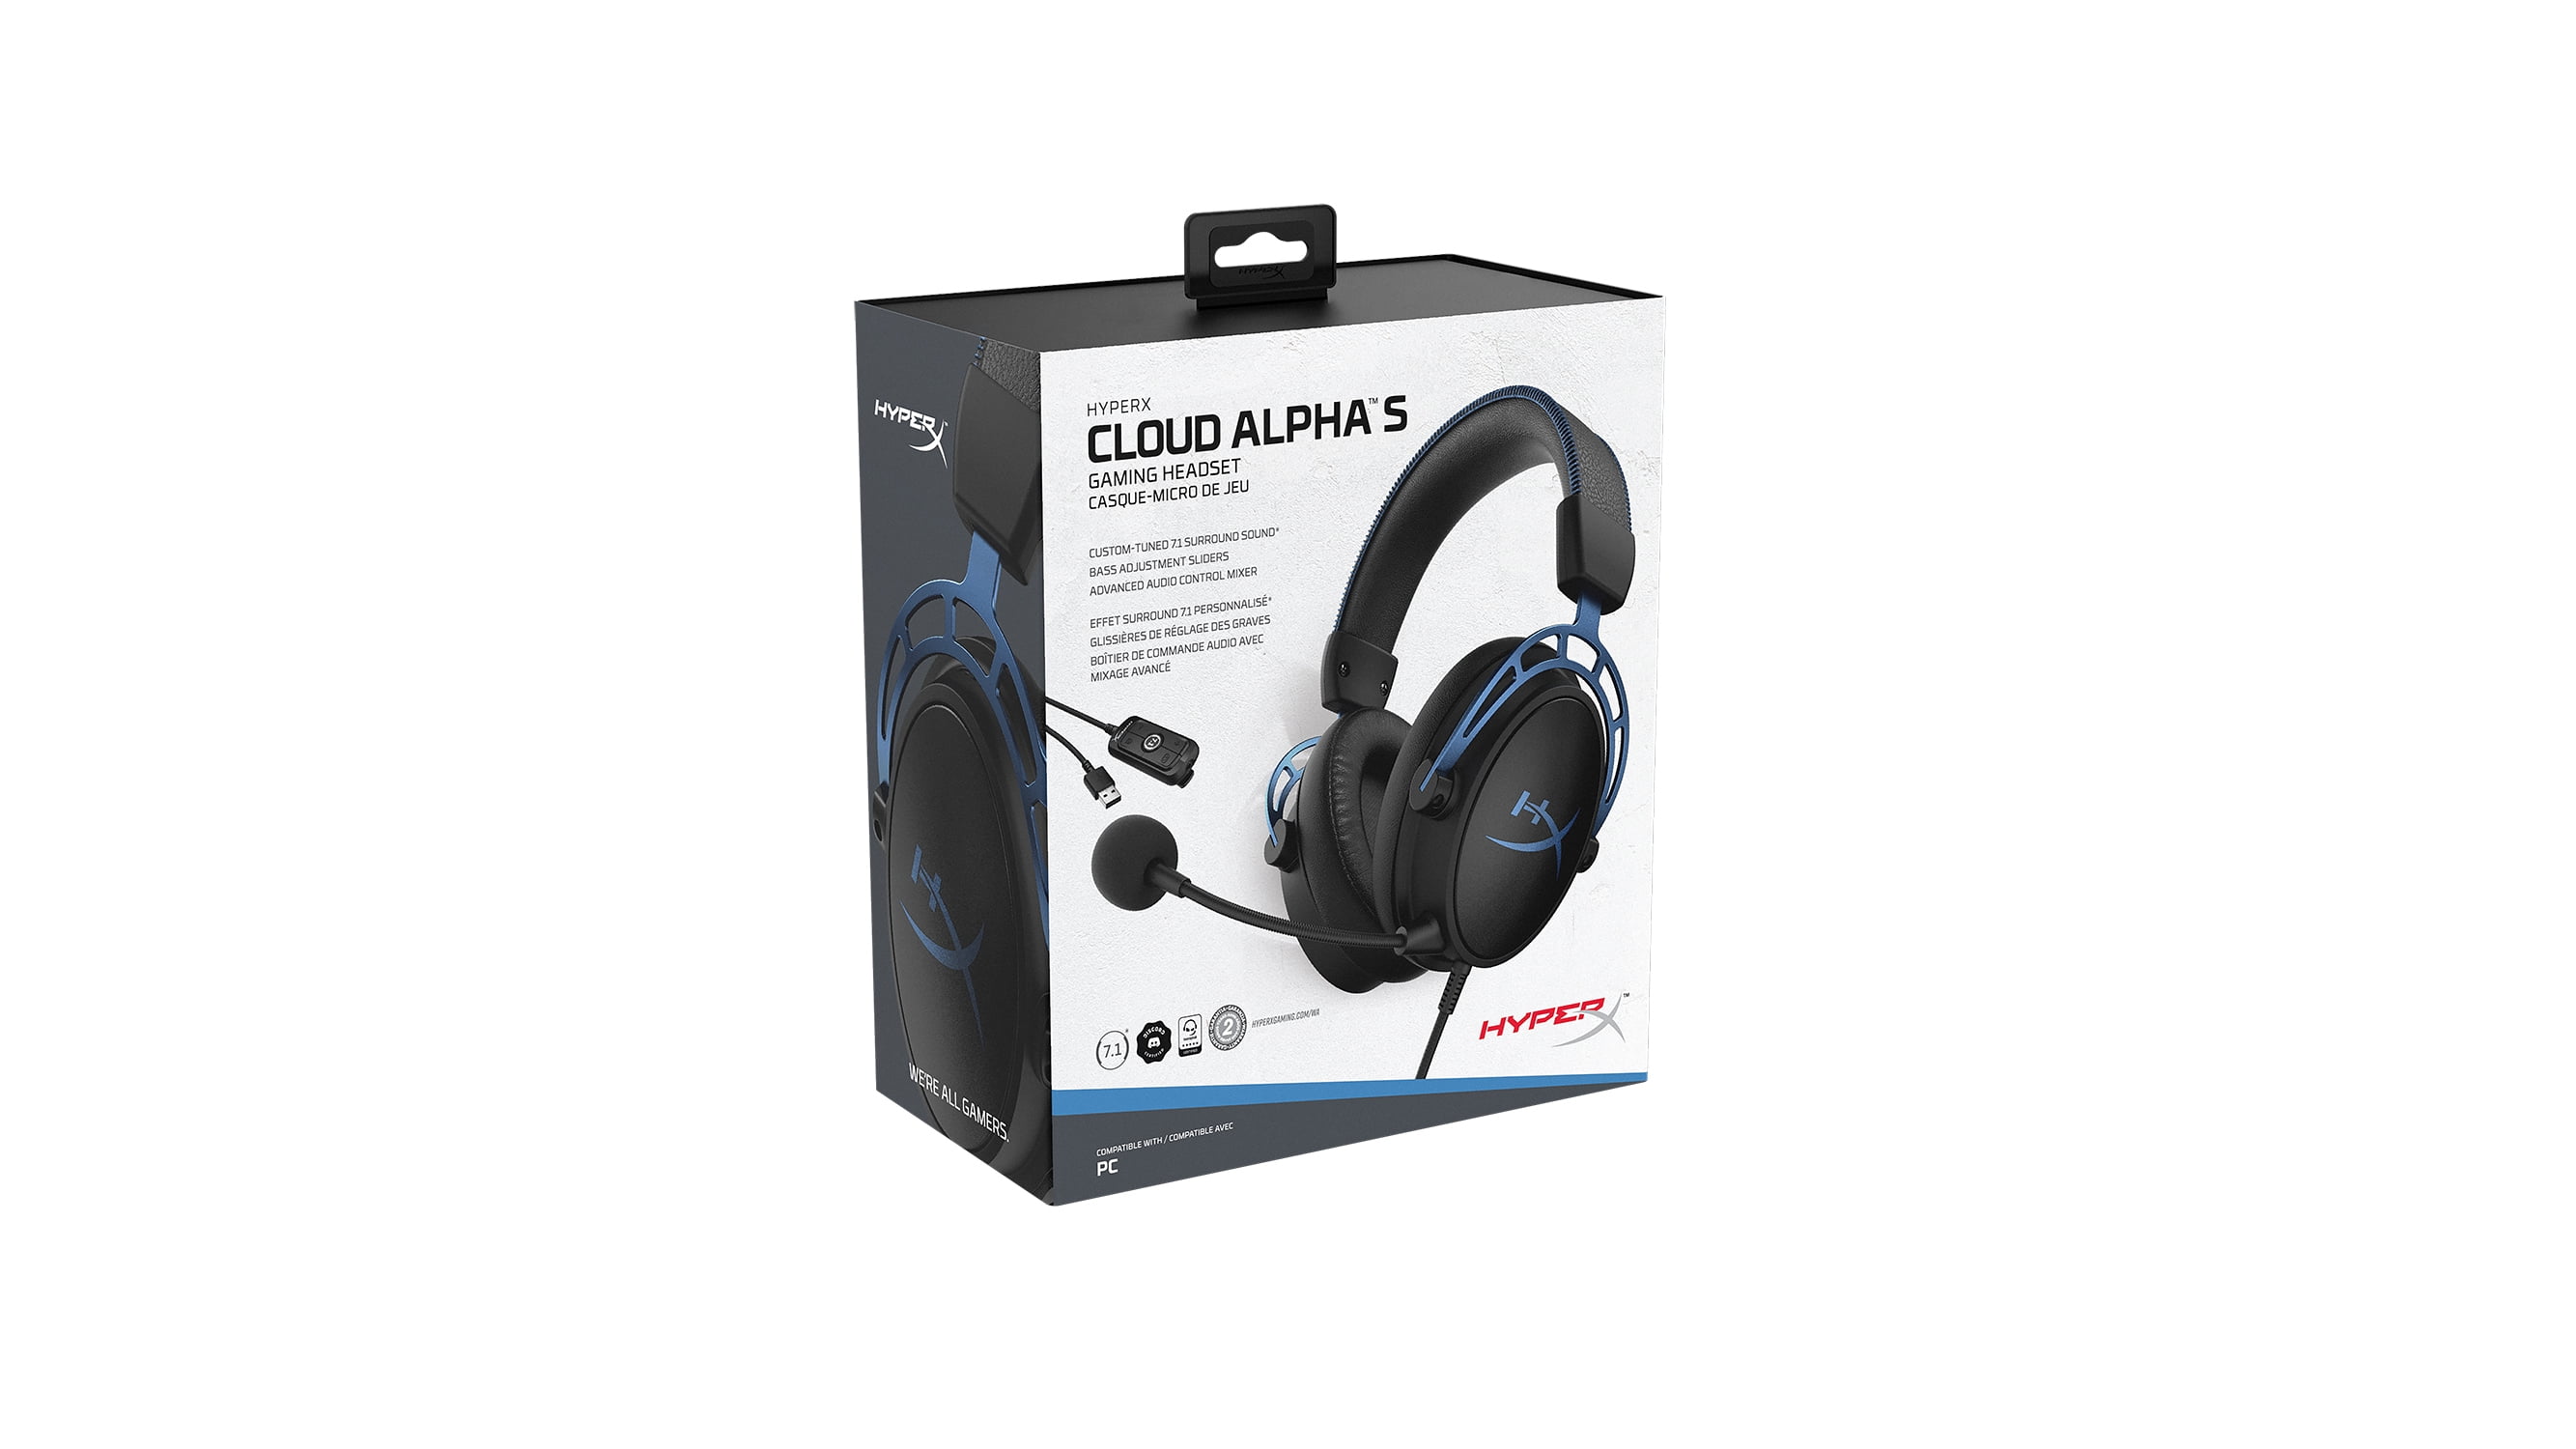 wijs Verduisteren passend HyperX Cloud Alpha S - Gaming Headset, for PC, 7.1 Surround Sound,  Adjustable Bass, Dual Chamber Drivers, Chat Mixer, Breathable Leatherette,  Memory Foam, and Noise Cancelling Microphone - Walmart.com